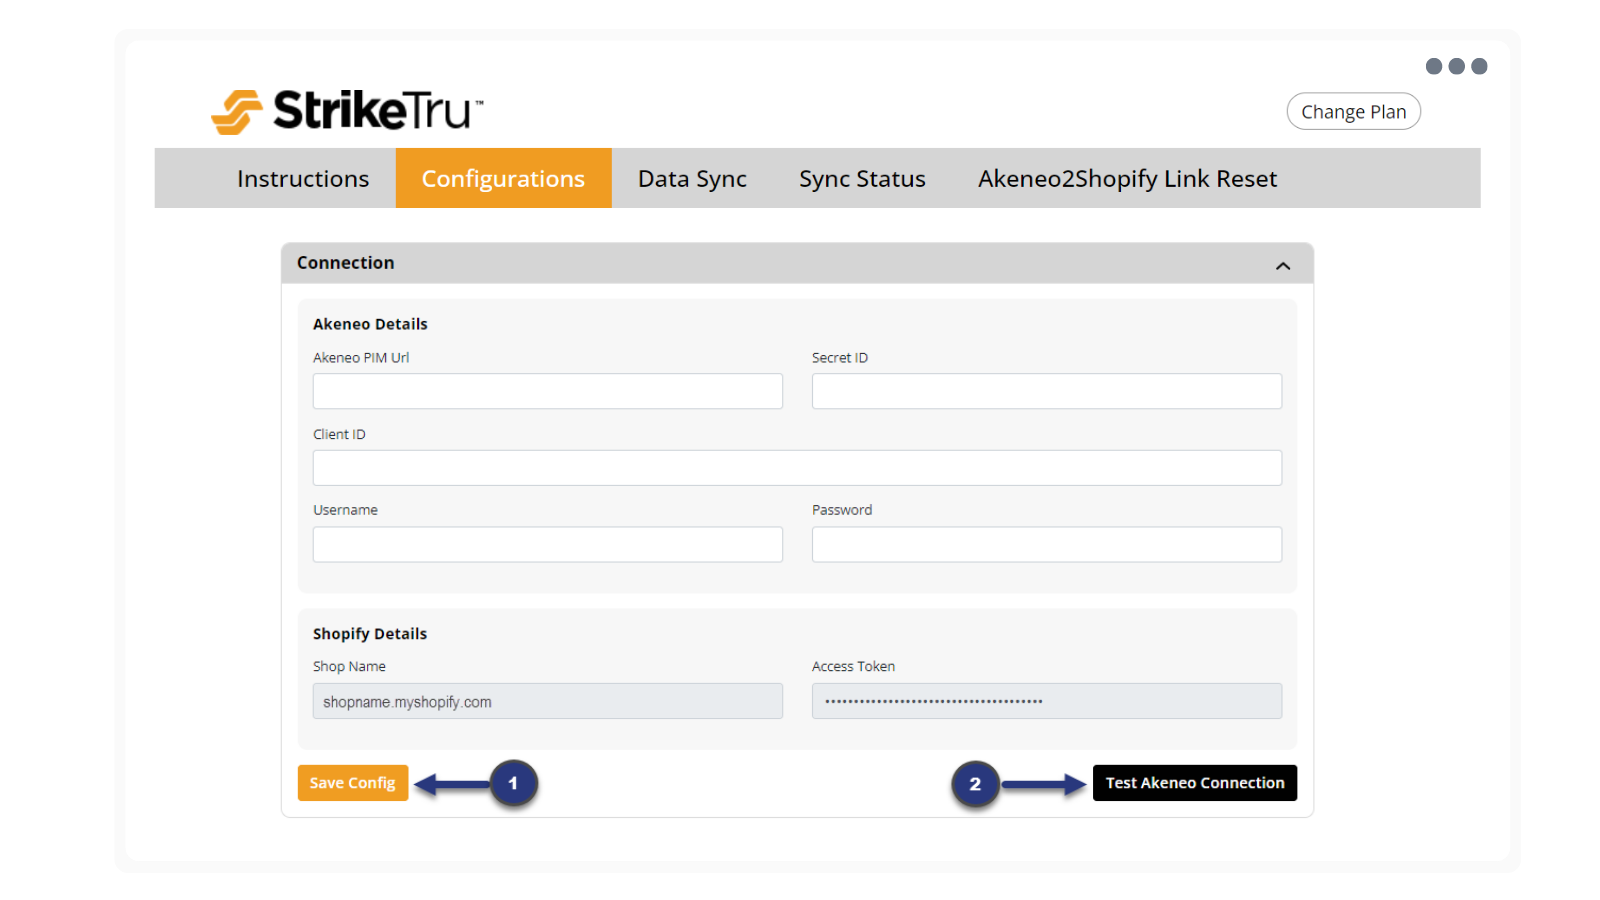 Provide your Akeneo PIM API details, and test the connection